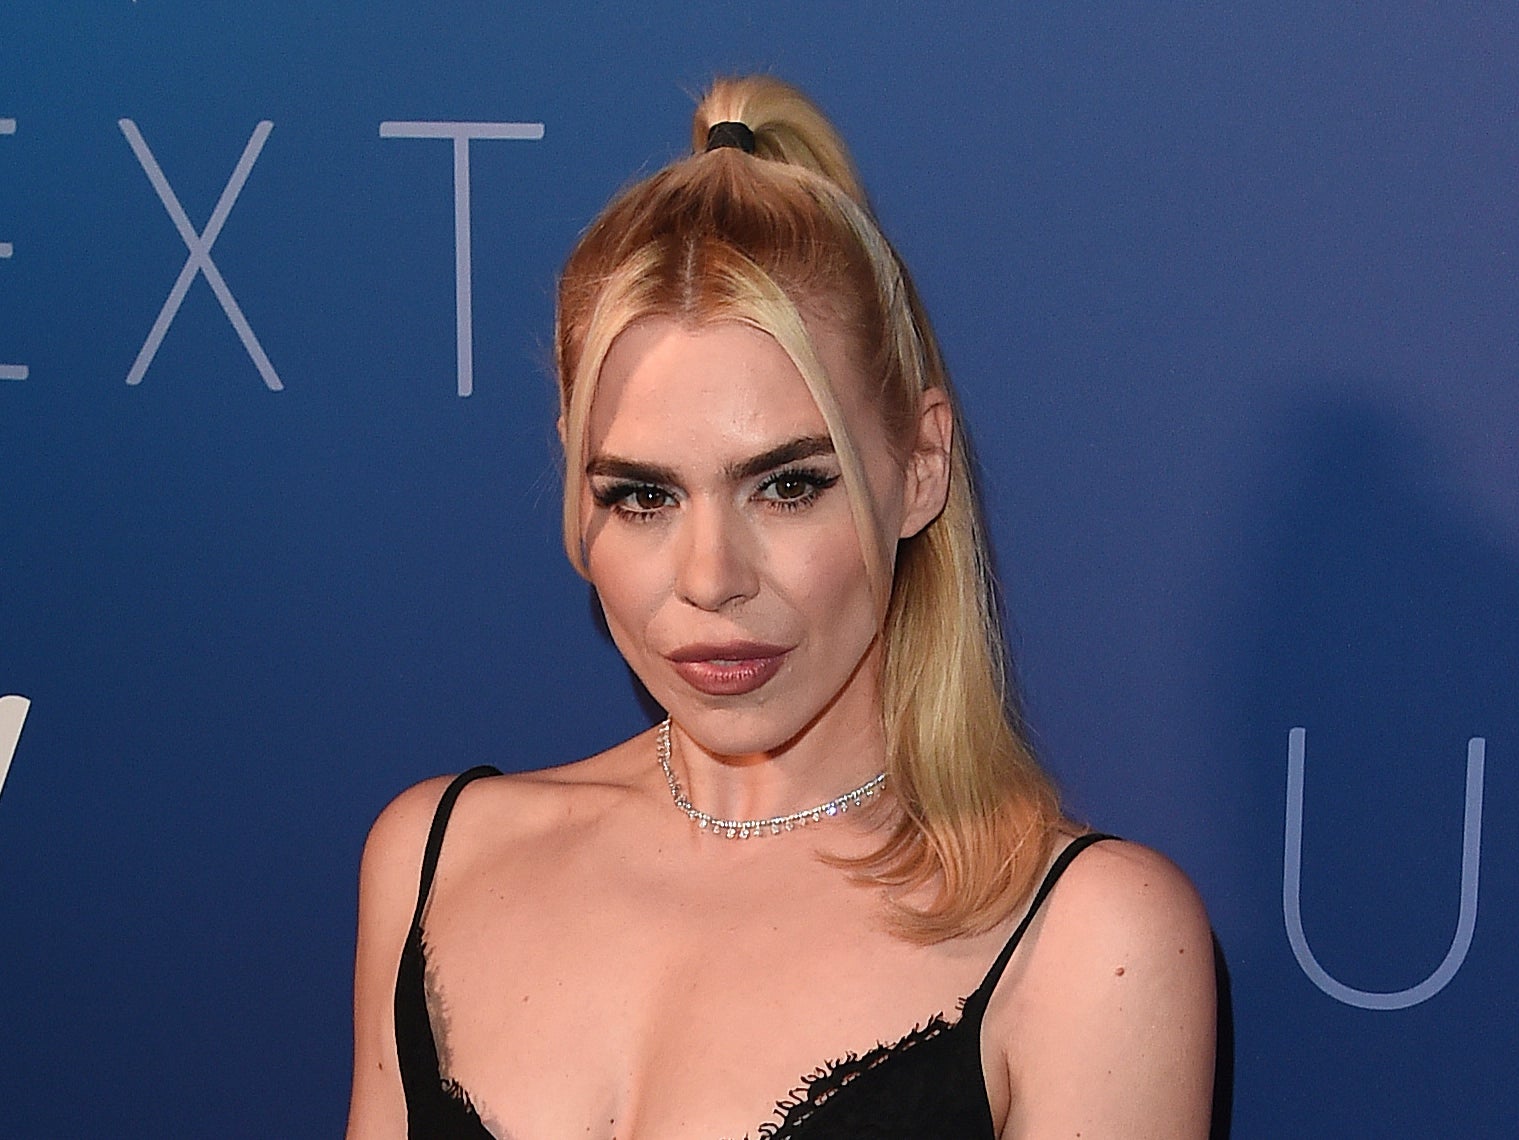 ‘I Hate Suzie’ star Billie Piper will be one of the guests appearing in person at Sunday’s Bafta TV awards